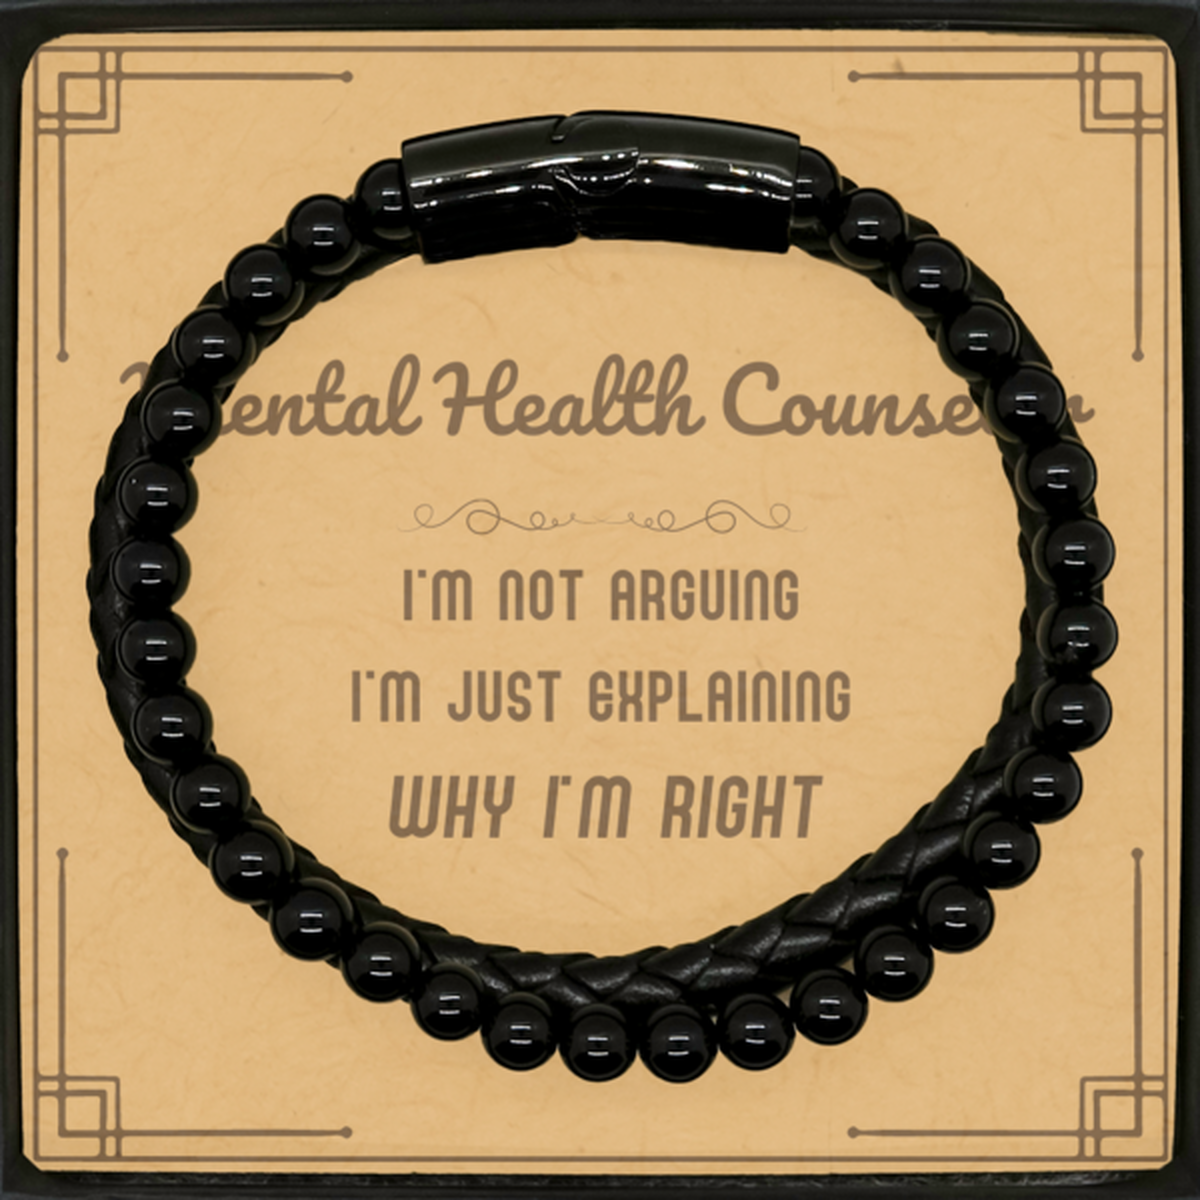 Mental Health Counselor I'm not Arguing. I'm Just Explaining Why I'm RIGHT Stone Leather Bracelets, Funny Saying Quote Mental Health Counselor Gifts For Mental Health Counselor Message Card Graduation Birthday Christmas Gifts for Men Women Coworker